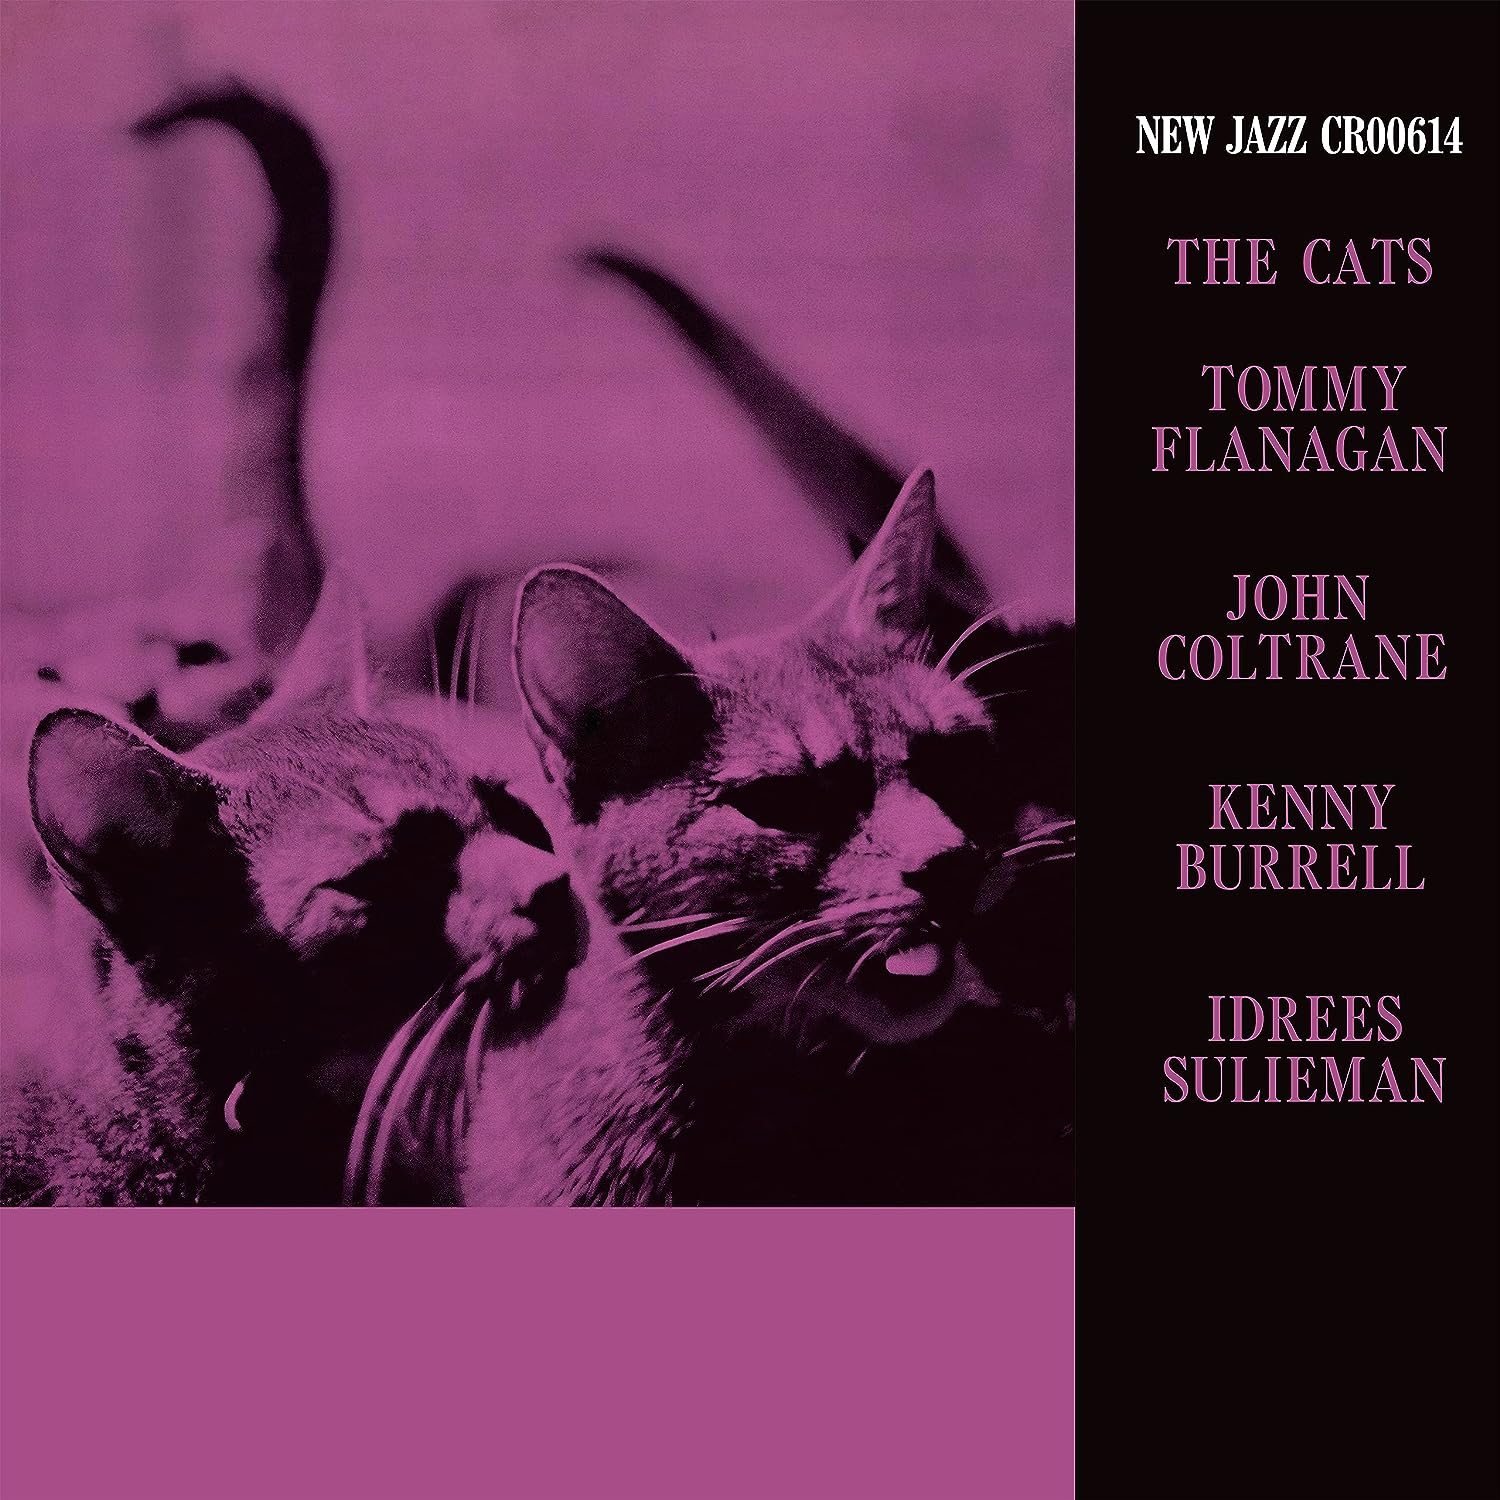 Джаз Universal (Aus) Flanagan; Coltrane; Burrell; Sulieman - The Cats (Original Jazz Classics) (Black Vinyl LP) bird feeding gloves bite proof handling gloves long arm protection for cats dogs birds thickened resistant to bites for grooming